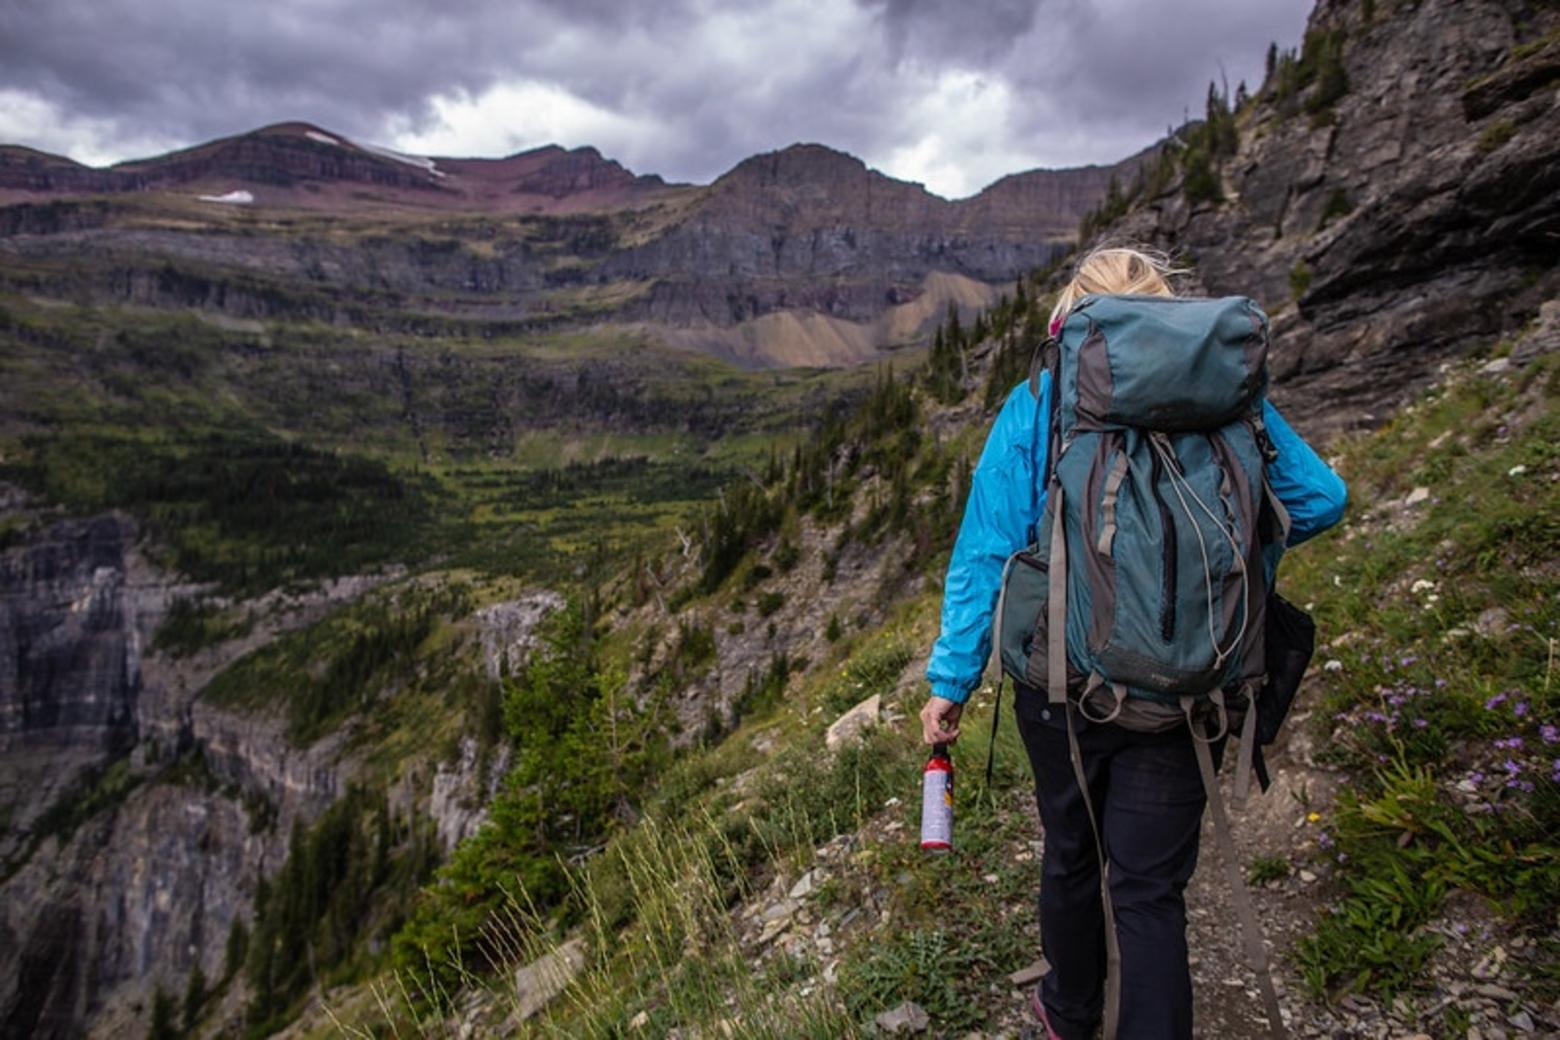 A hiker in Glacier explores a backcountry trail in the Northern Rockies. Photo courtesy NPS